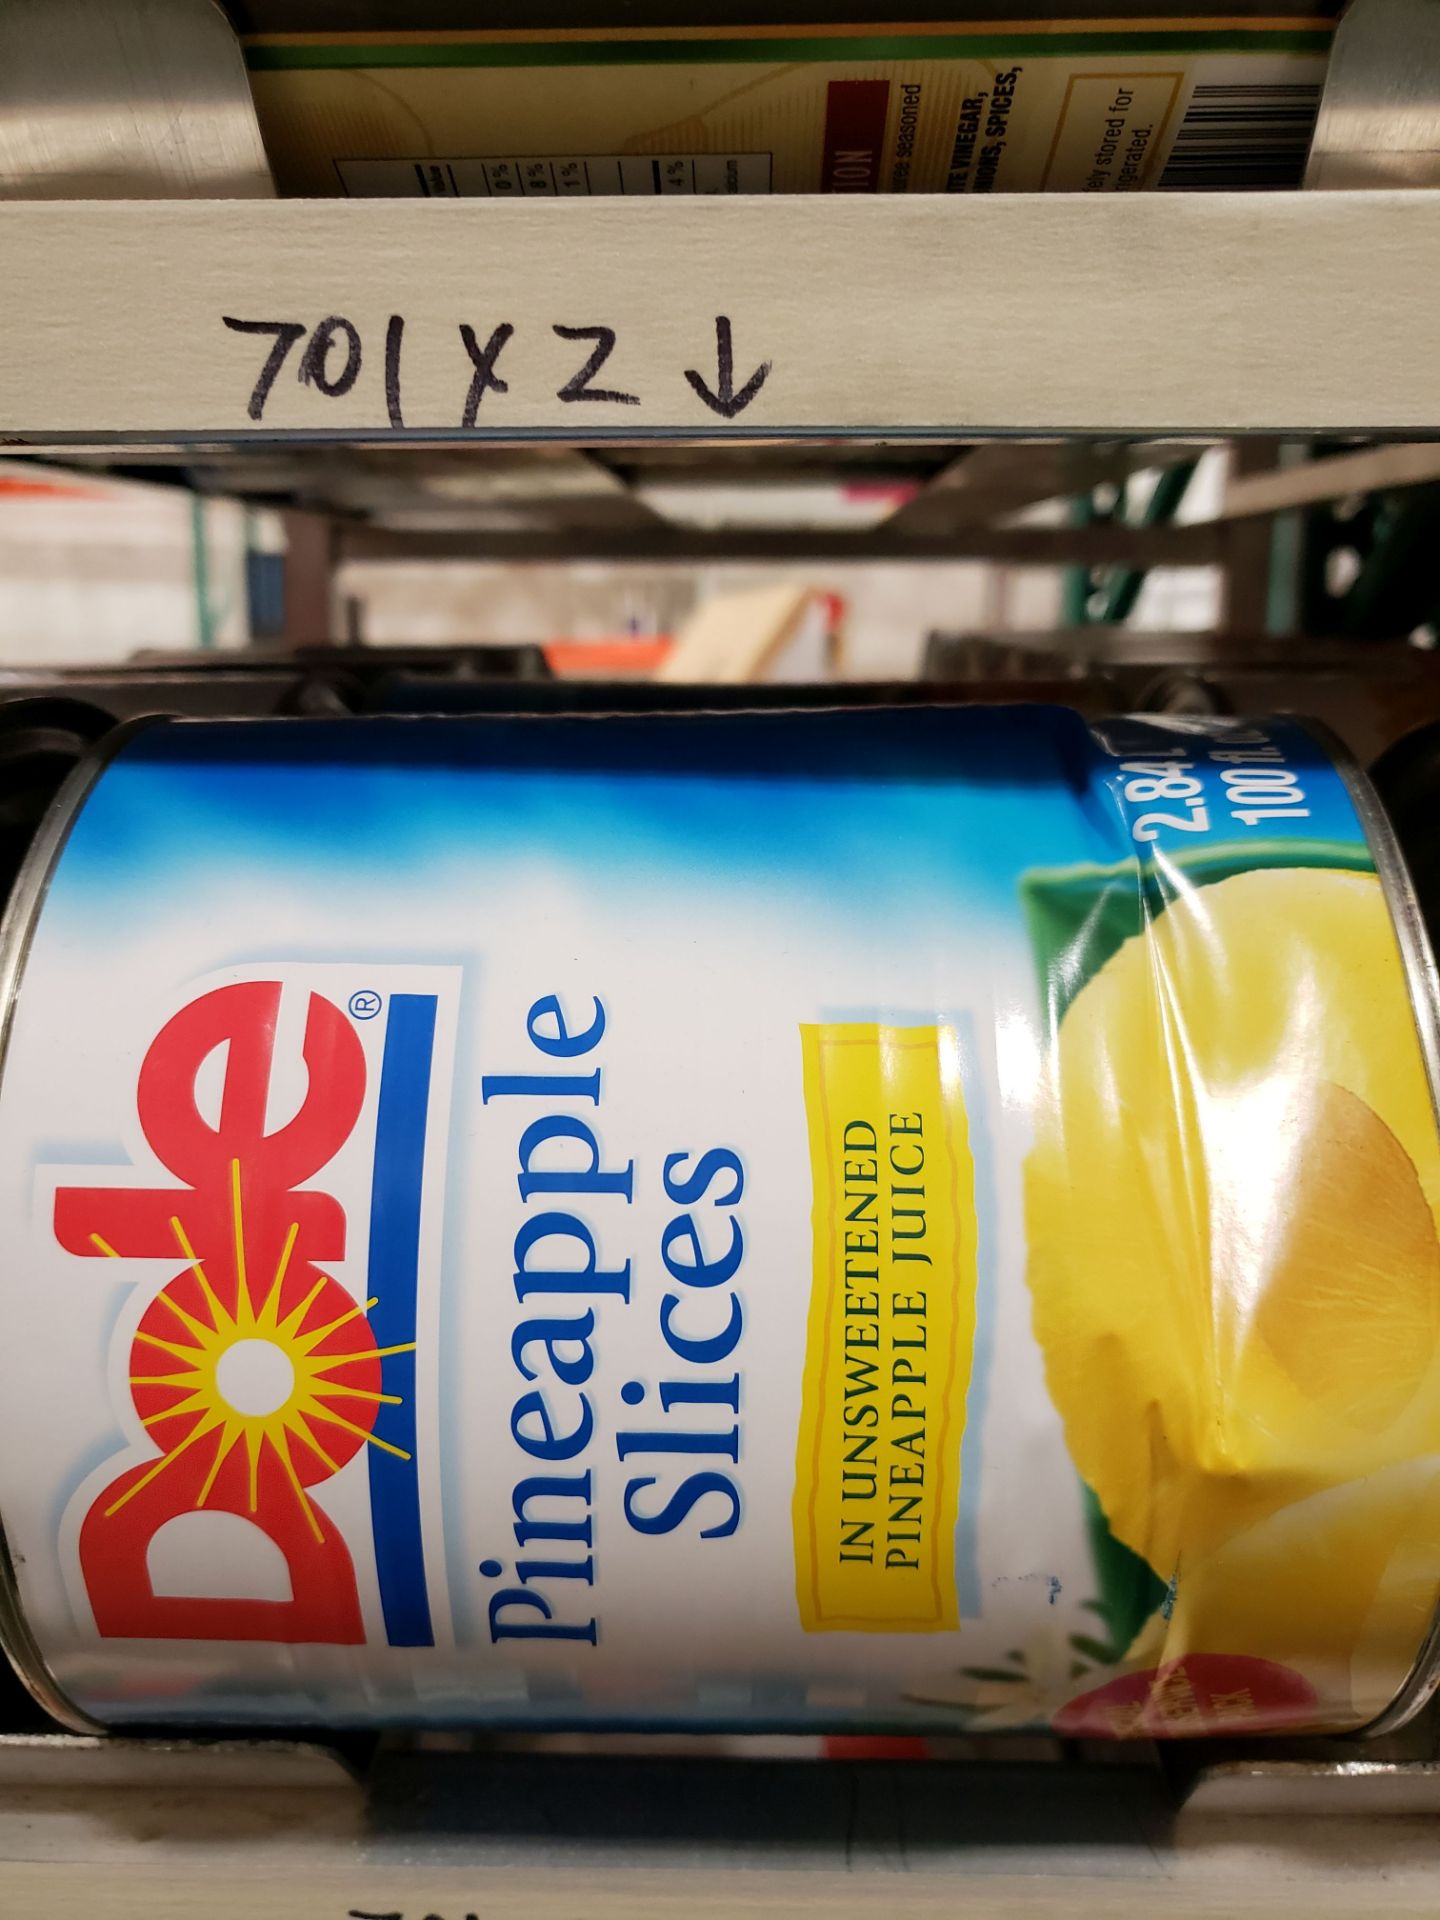 Dole Pineapple Slices - 2 x 2.84lt Cans